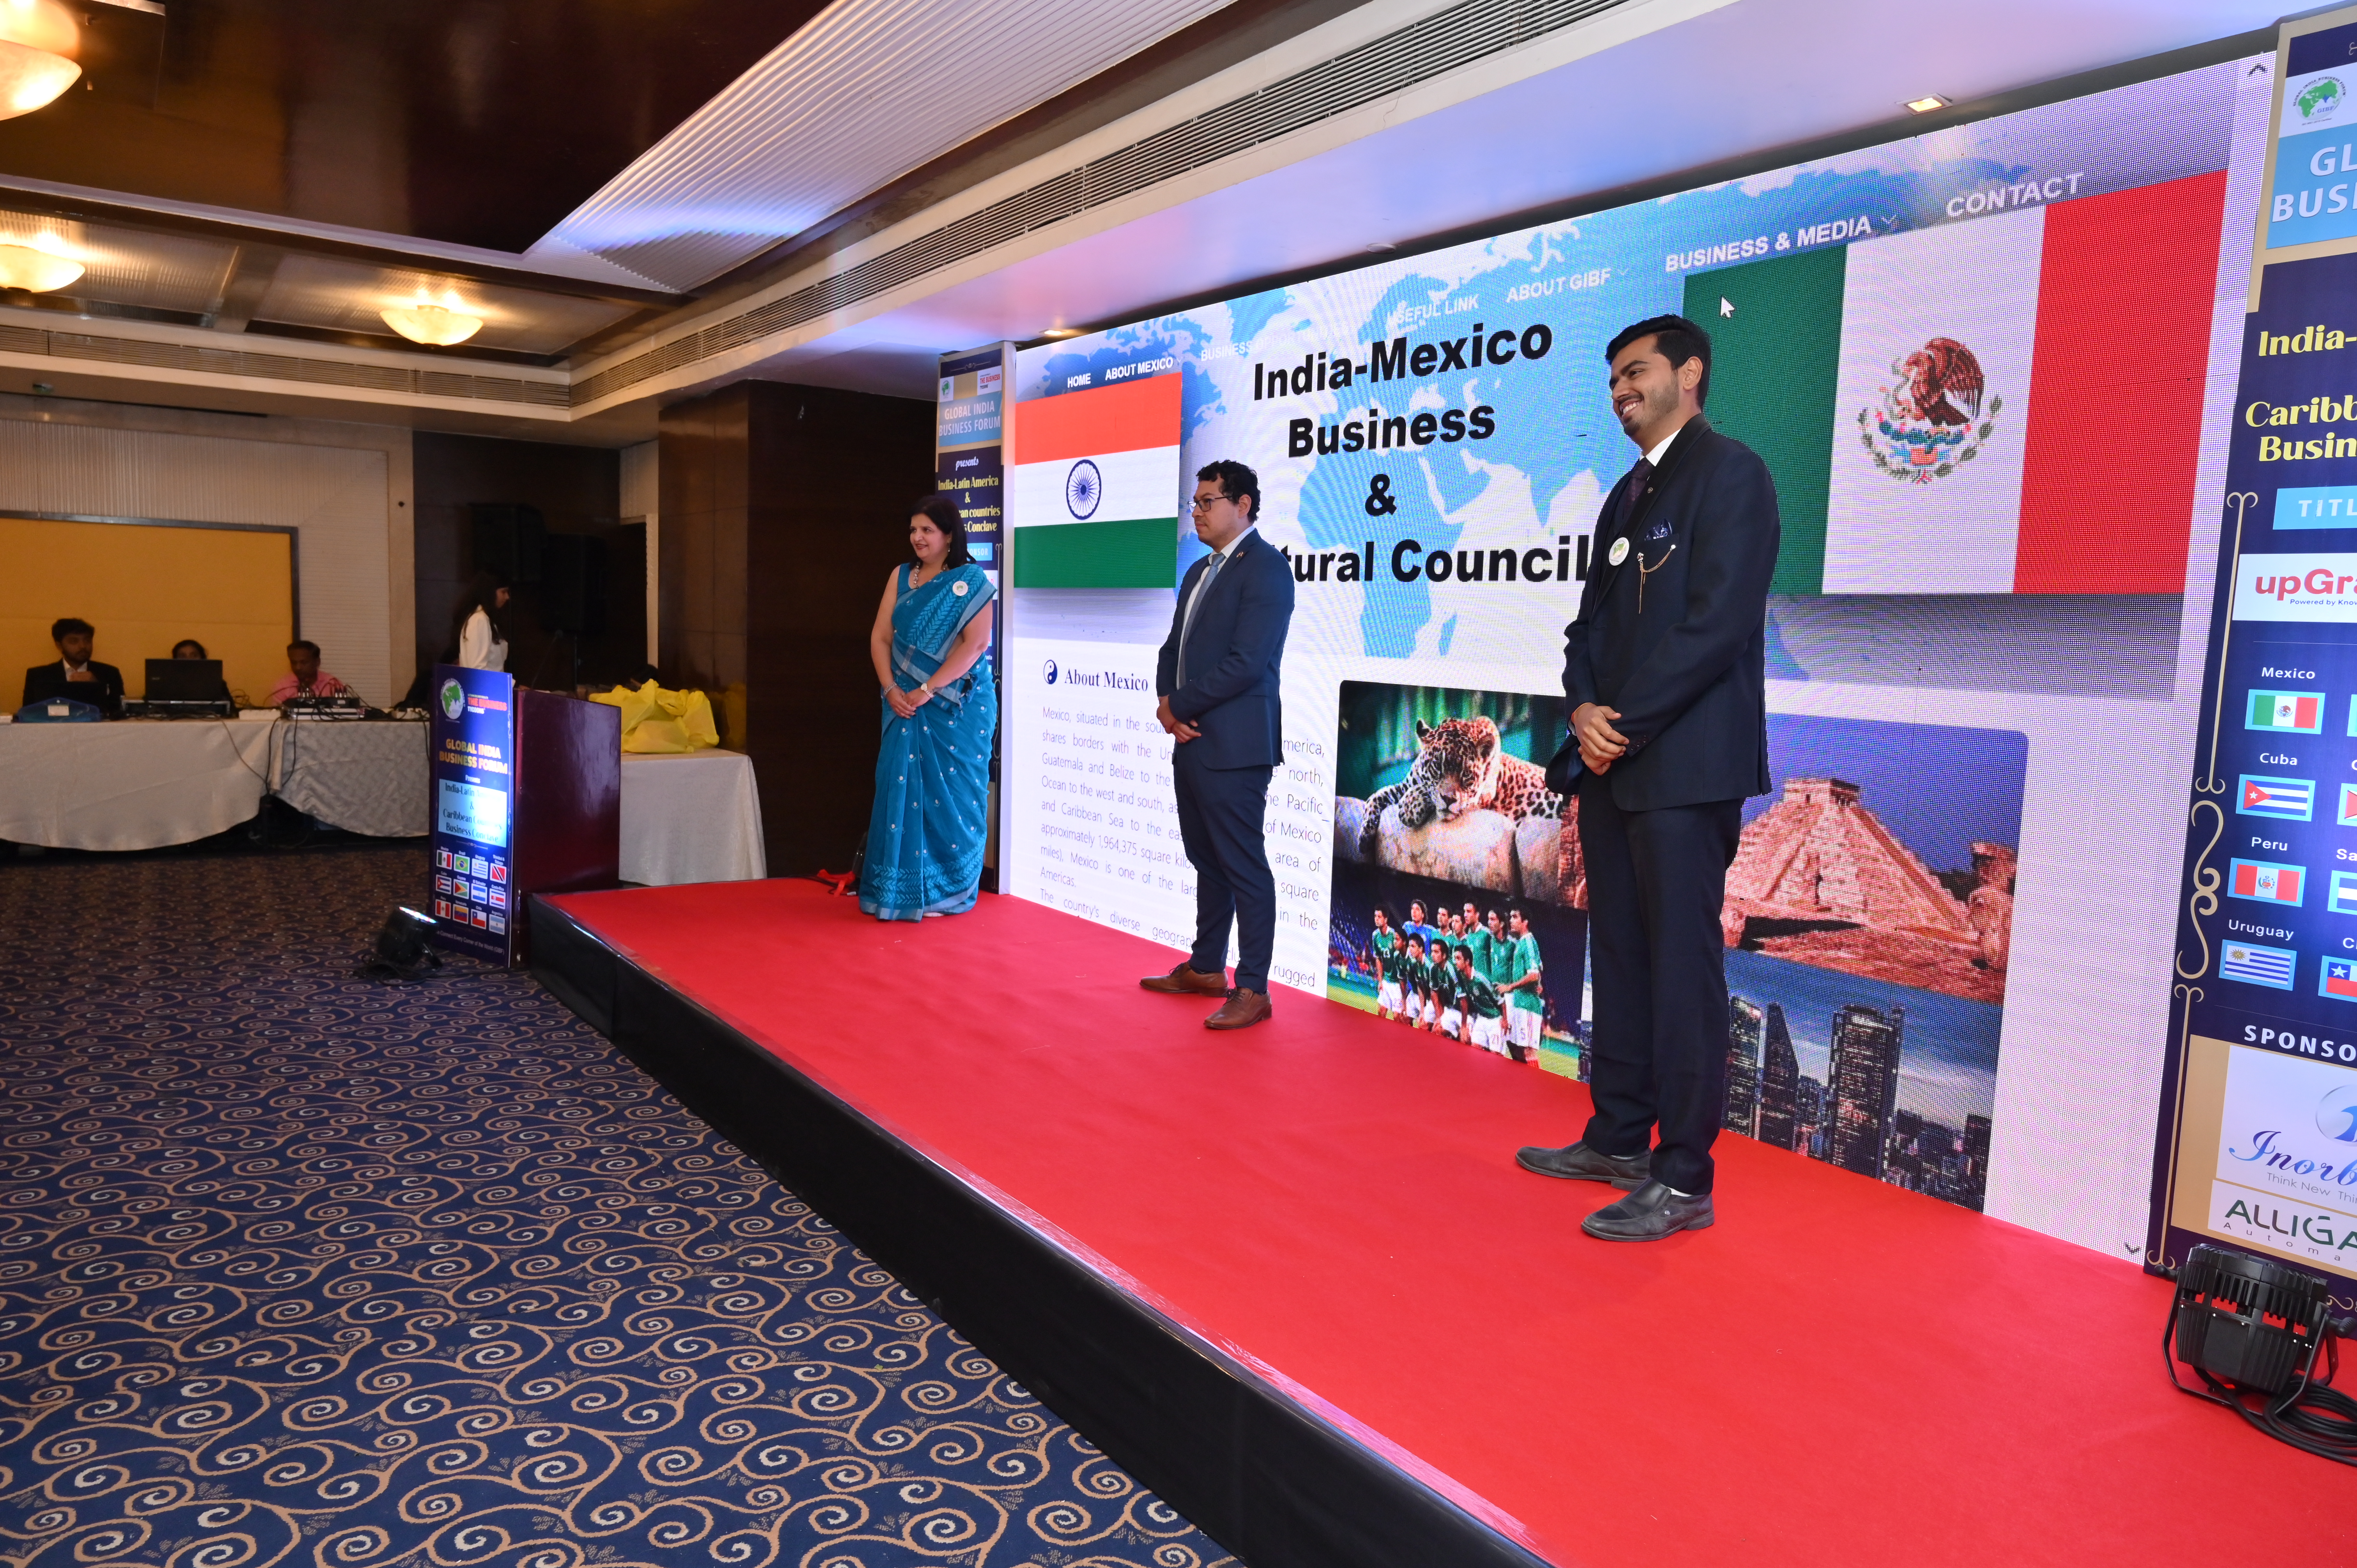 gibf-past-event-india-latin-america-and-caribbean-country-business-conclave-mexico-website-of-india-mexico-business-and-cultural-council-2024